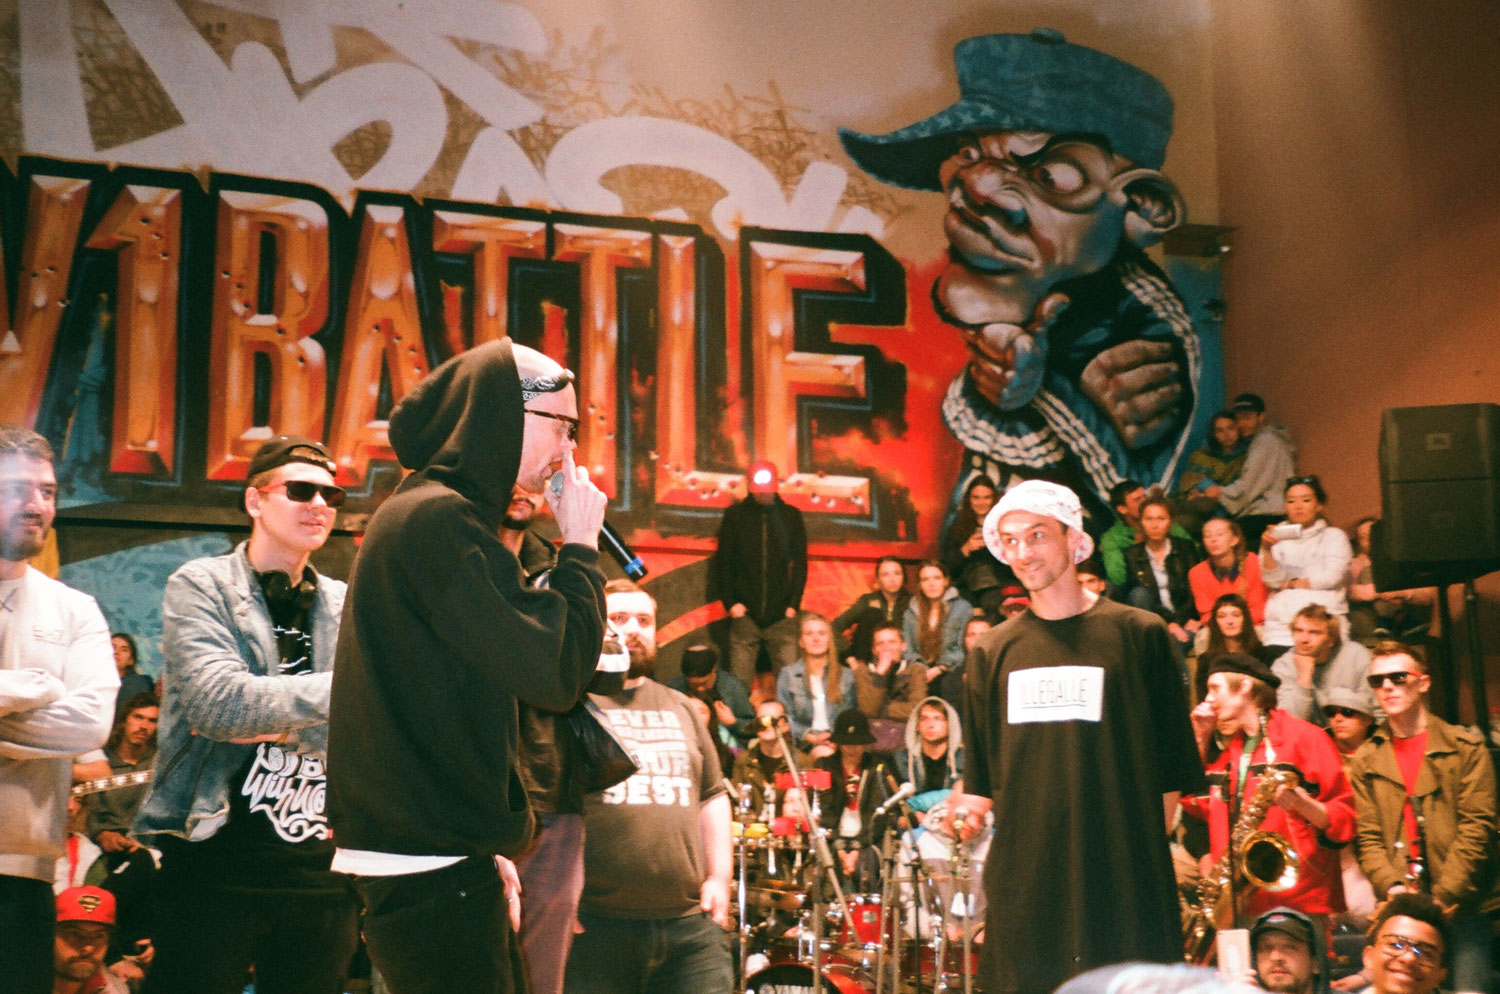 Rap battle with a crowd and a graffiti mural in the background